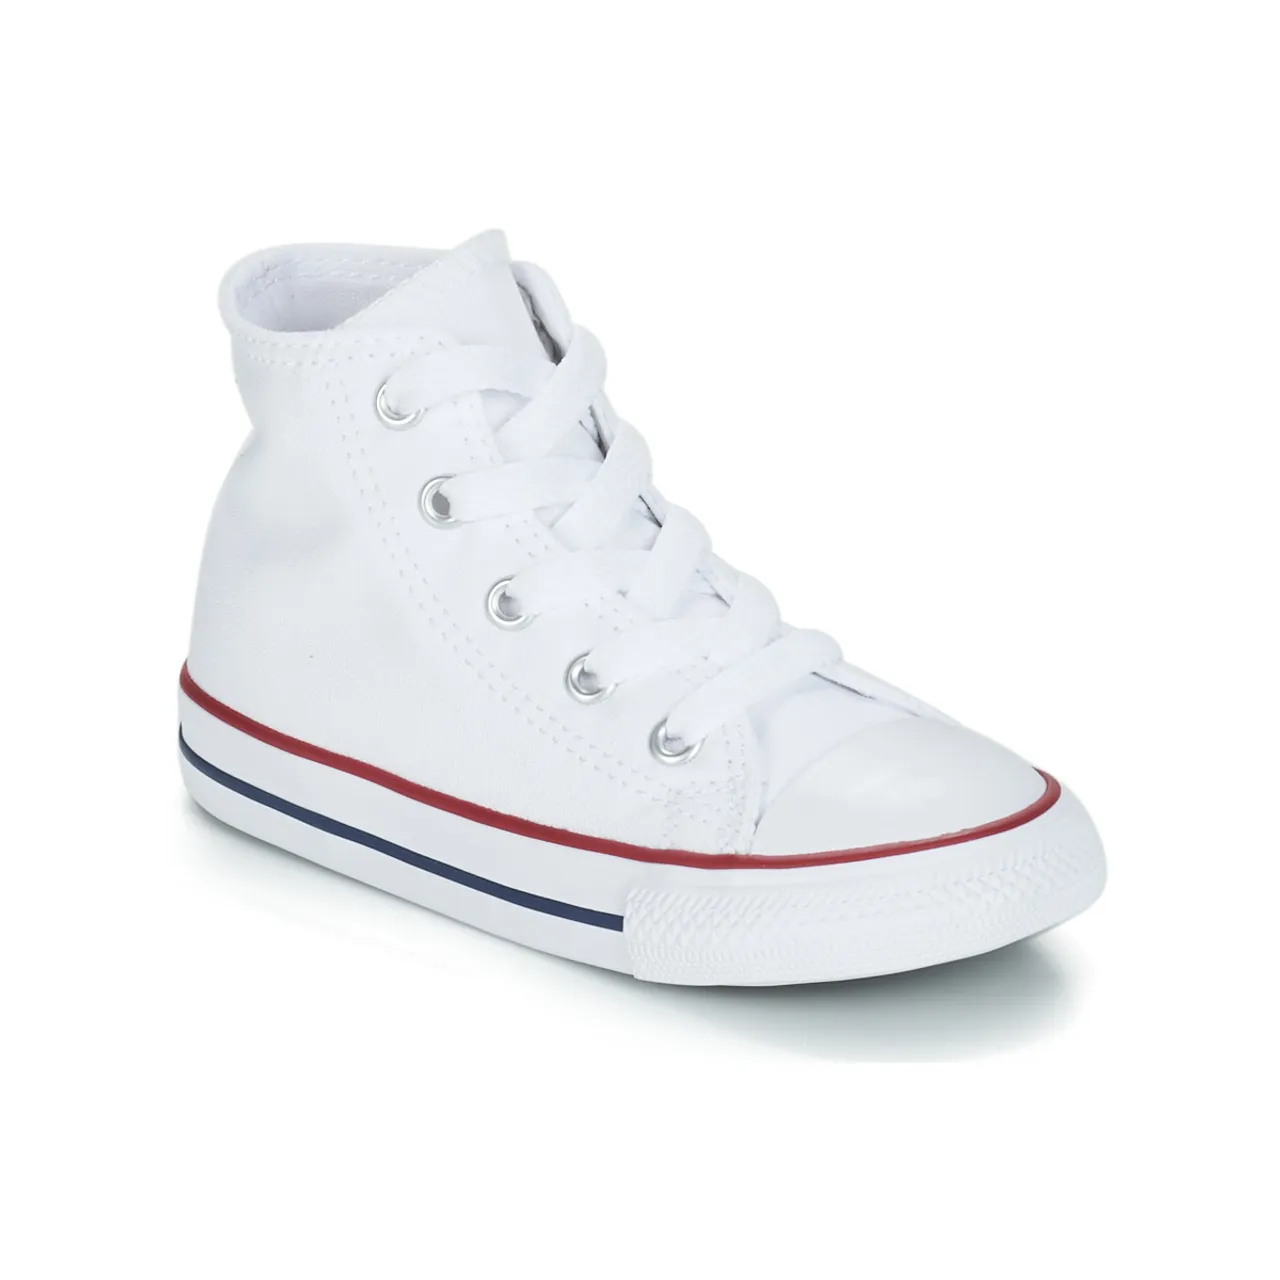 Converse  ALL STAR HI  boys's Children's Shoes (High-top Trainers) in White